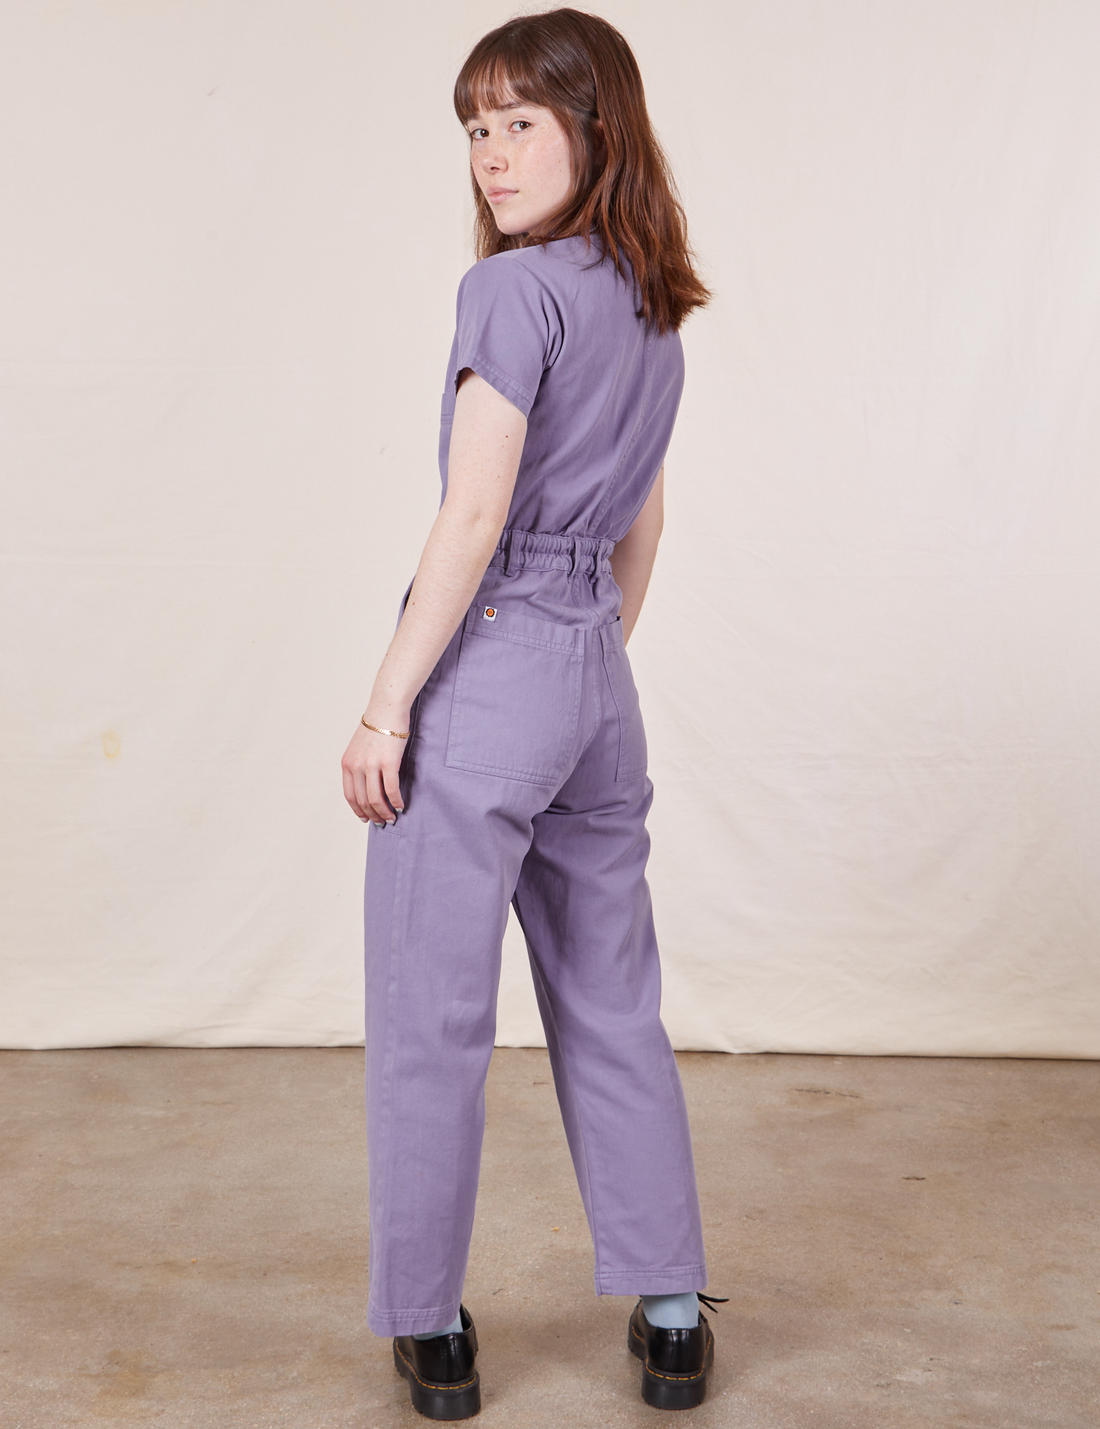 Petite Short Sleeve Jumpsuit in Faded Grape back view on Hana